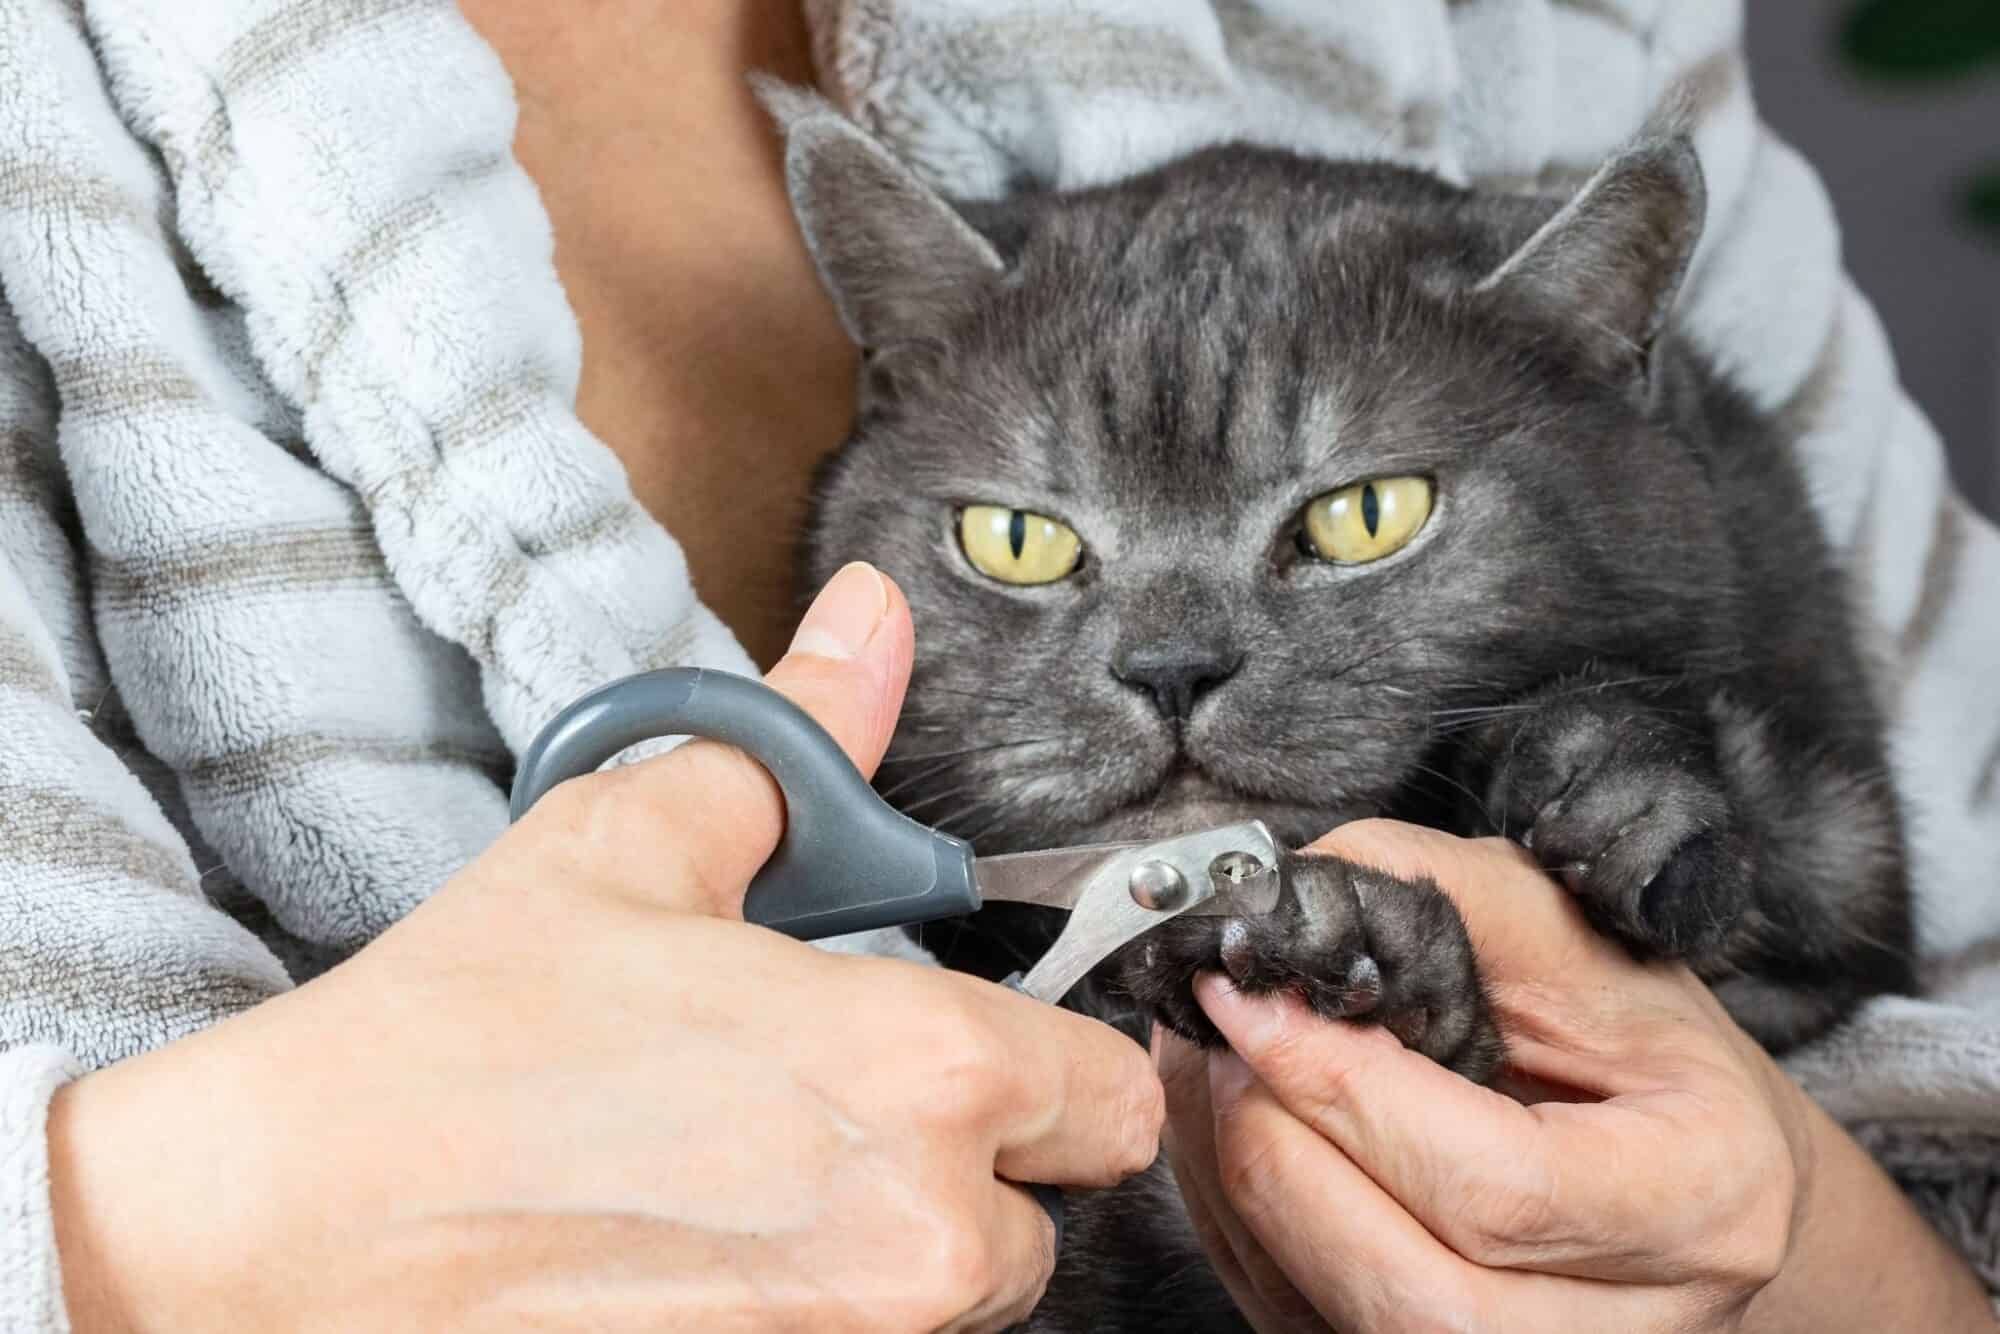 A cat frowns while having its nails trimmed.